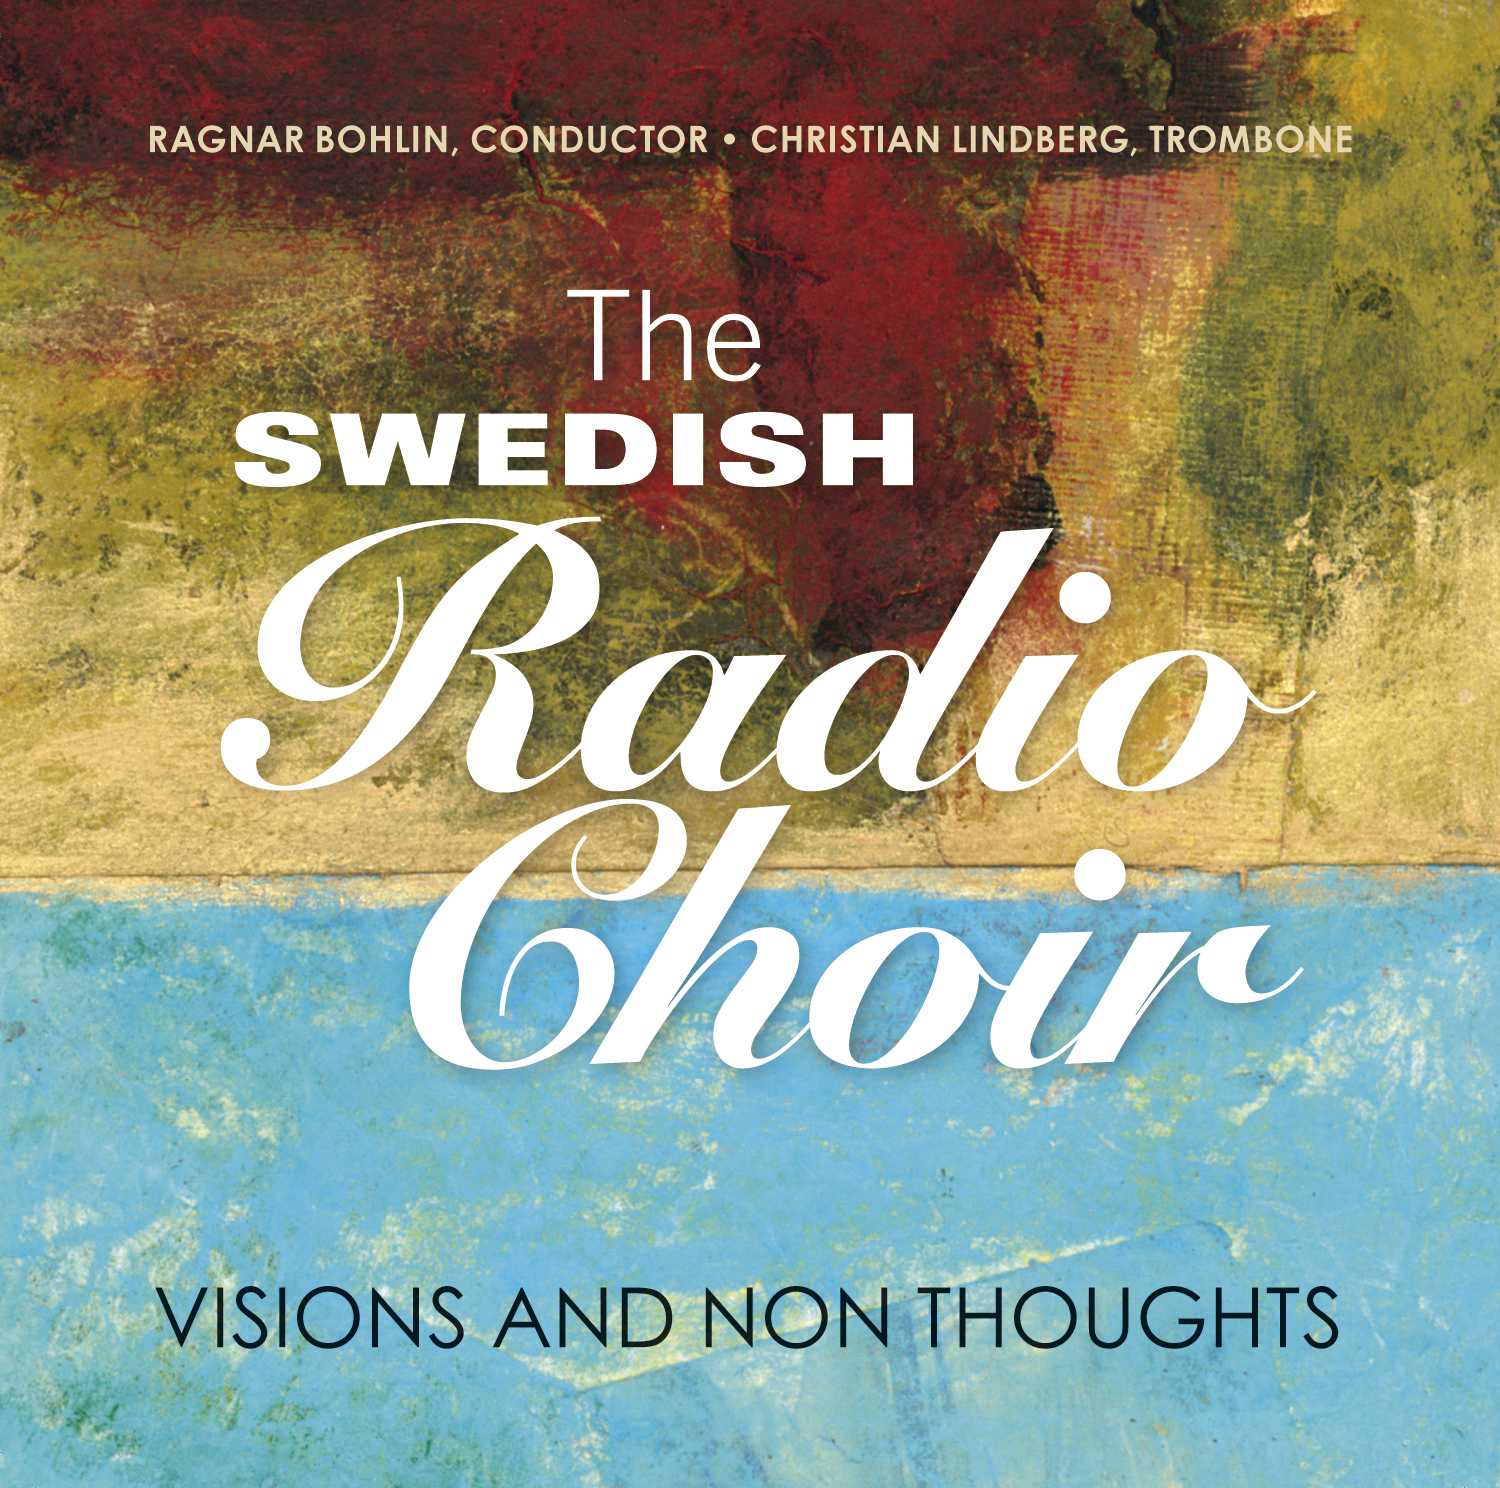 Visions and Non Thoughts:The Swedish Radio Choir